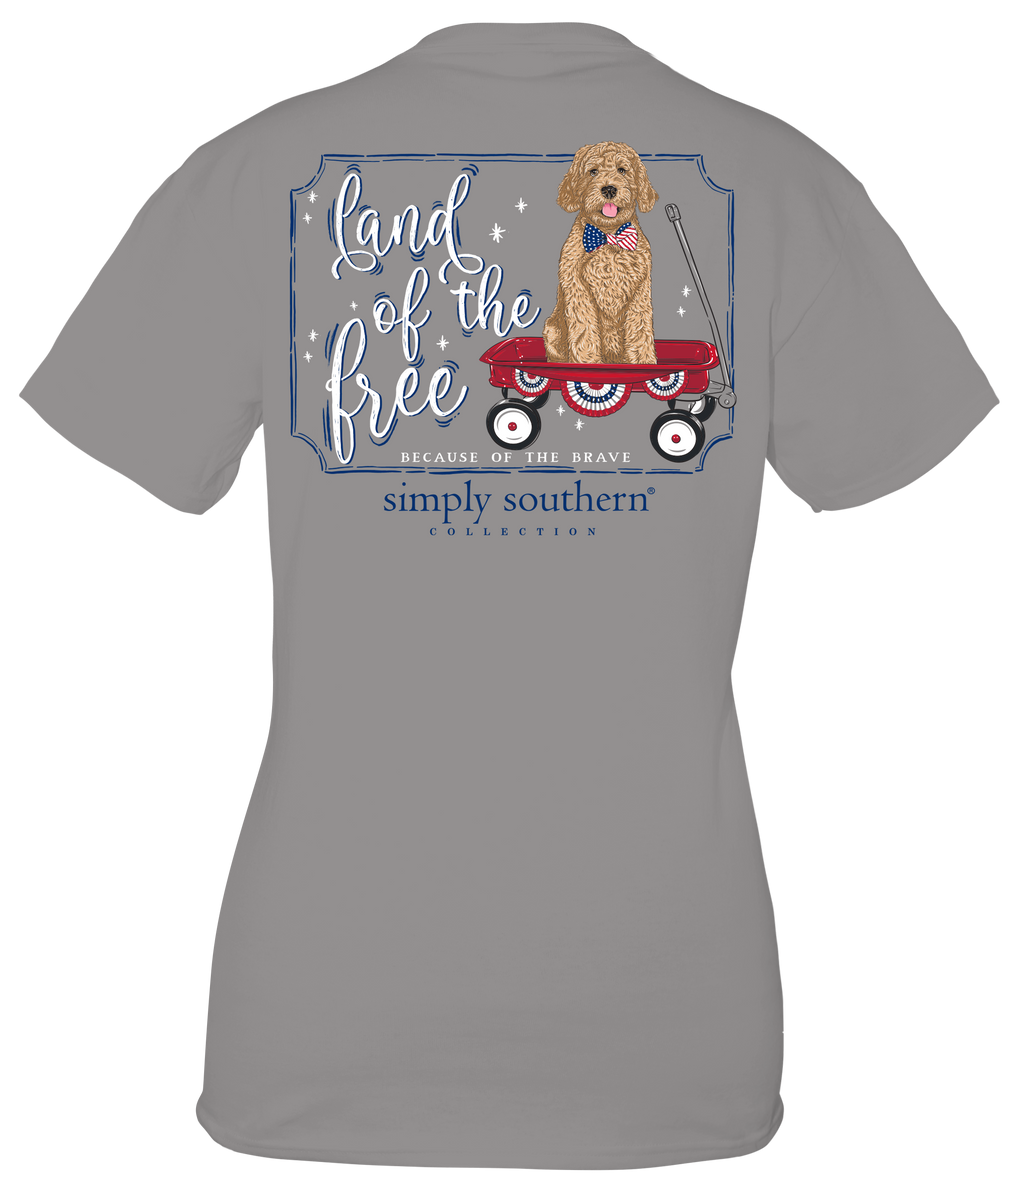 Simply Southern, Short Sleeve Tee - LAND OF THE FREE - Monogram Market